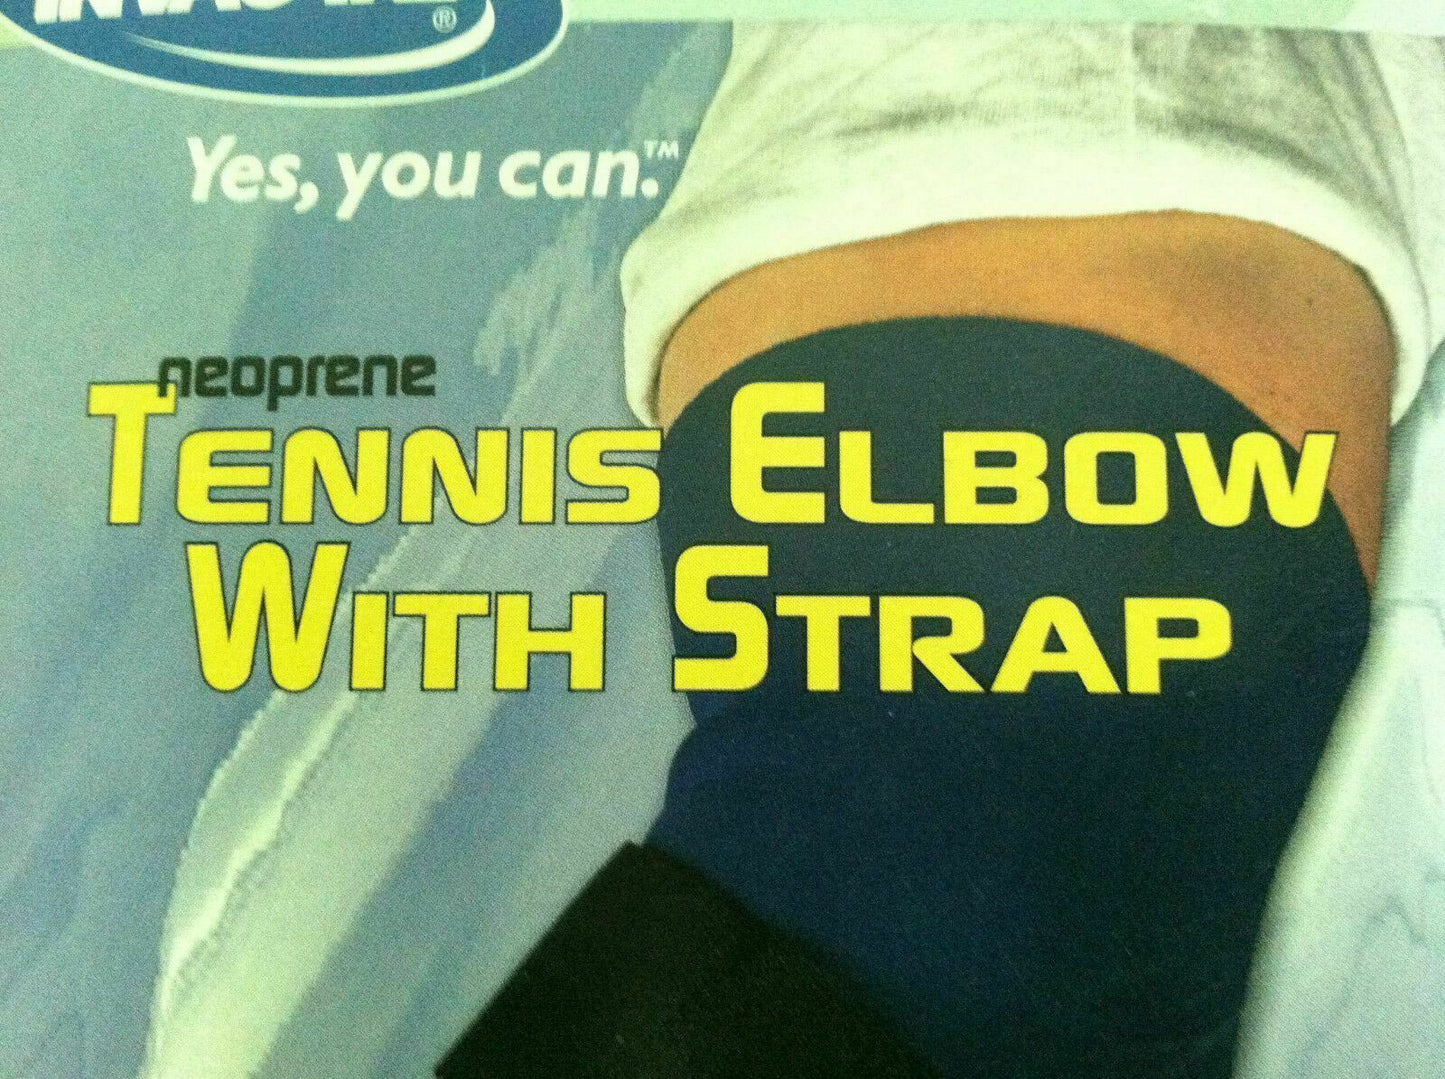 Invacare Slip On Tennis Elbow With Strap Size: 10" LARGE #6959